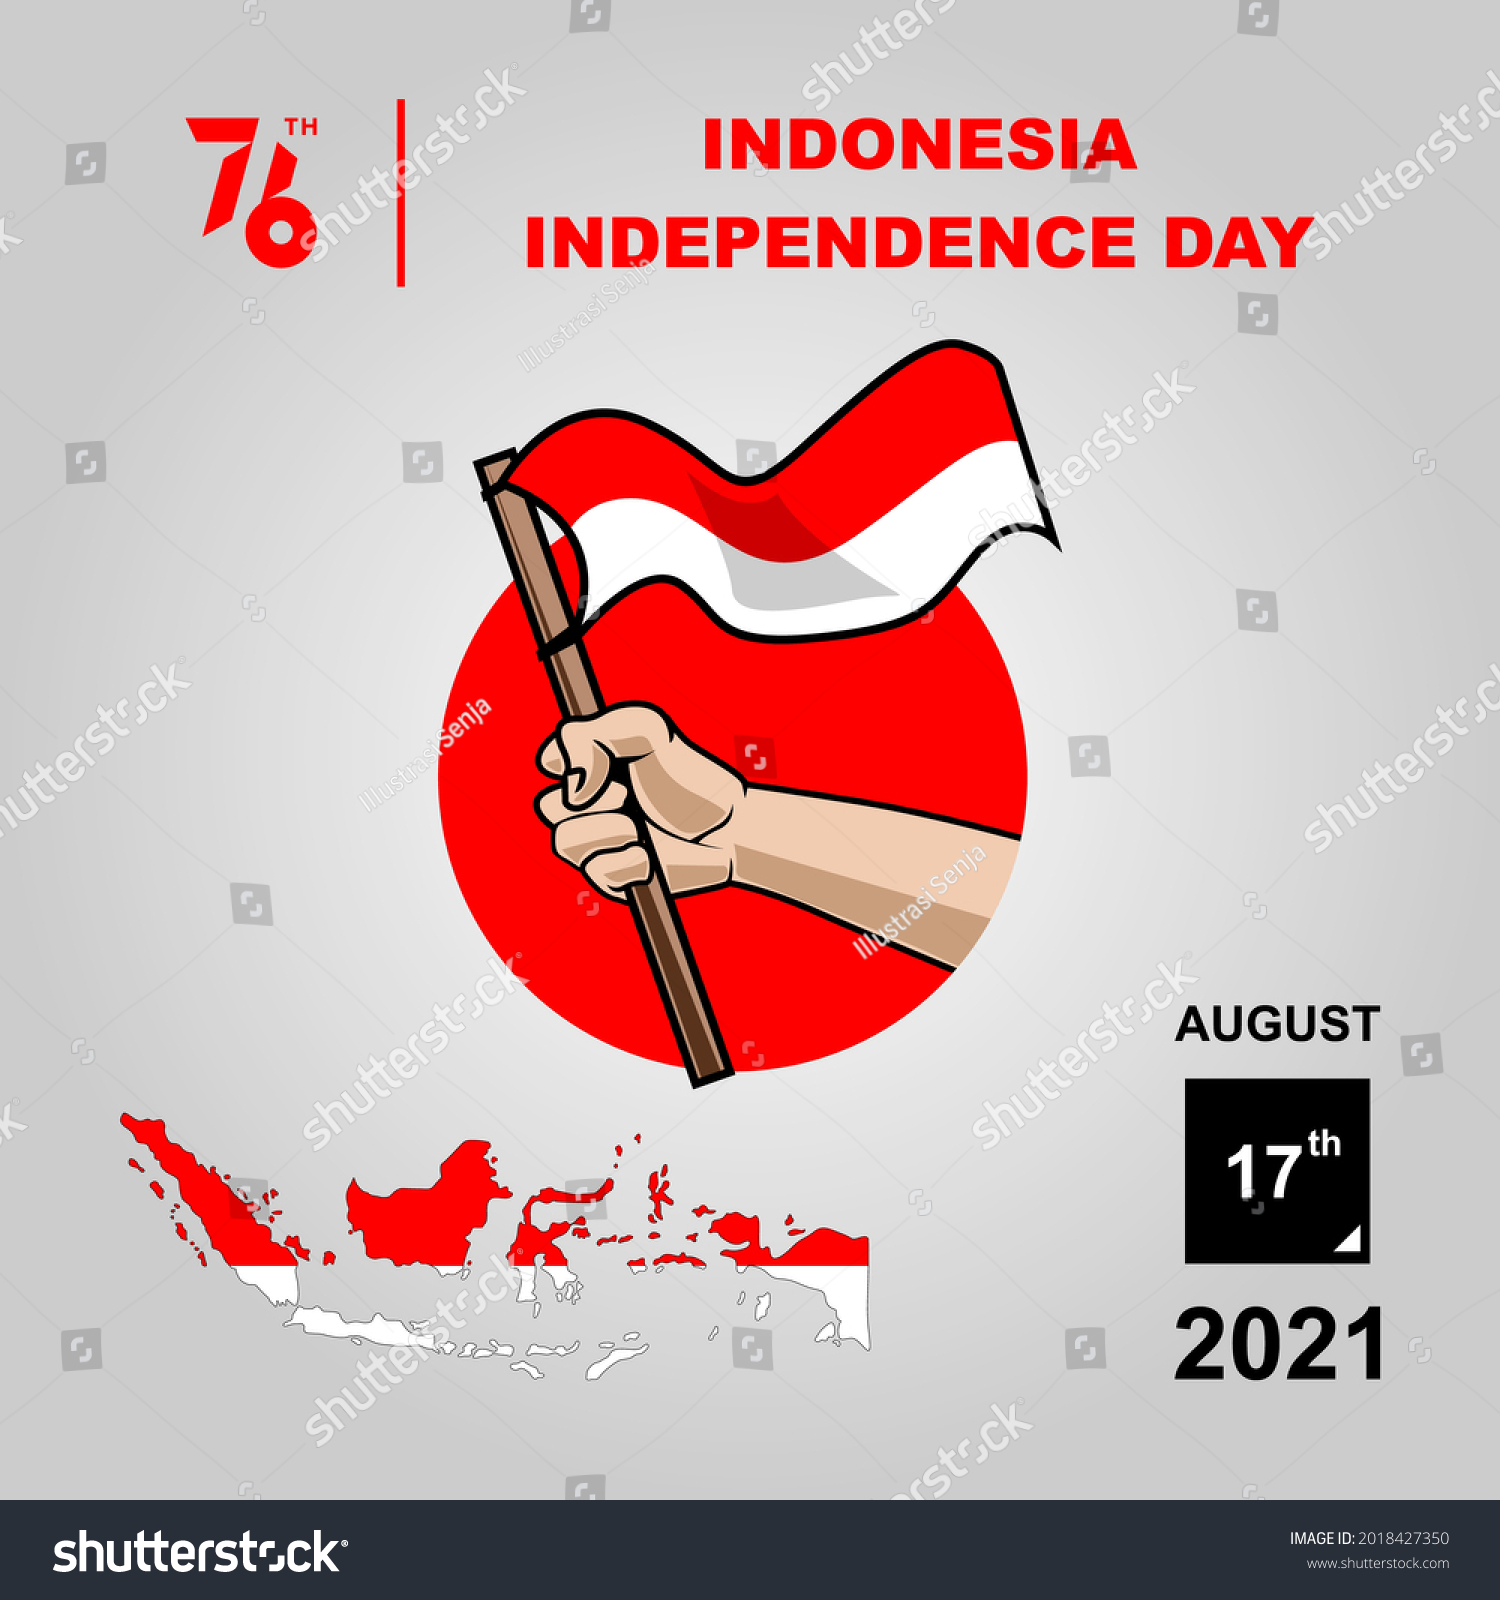 76th Indonesia Independence Day Indonesias Map Stock Vector Royalty Free 2018427350 Shutterstock 1938